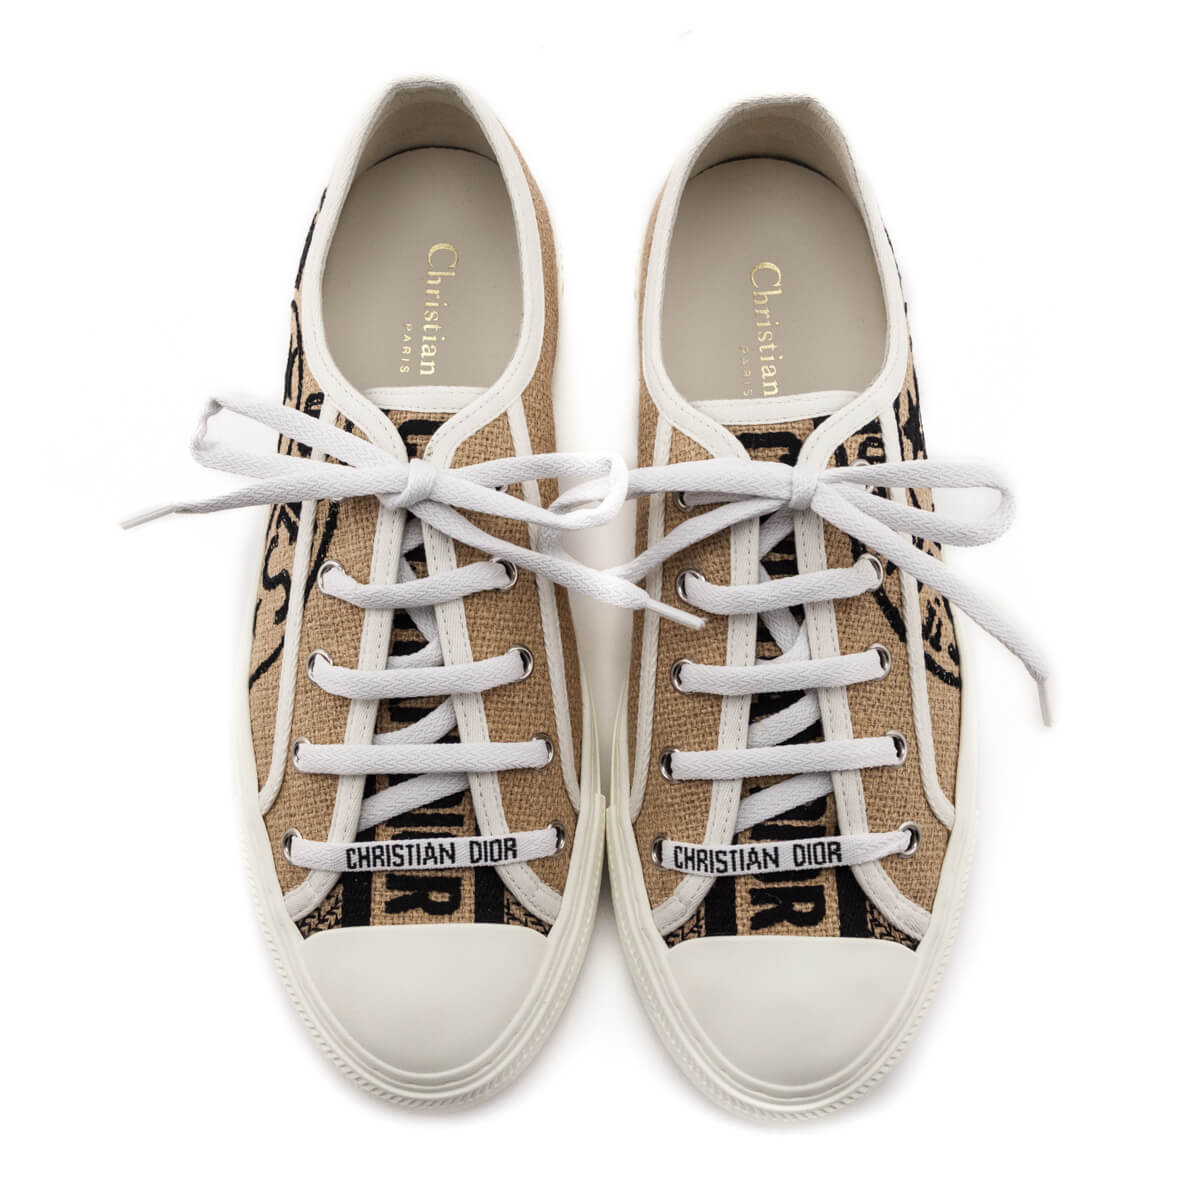 Dior Raw Beige Union Embroidered Walk'N'Dior Sneakers Size US 8 | EU 38 - Love that Bag etc - Preowned Authentic Designer Handbags & Preloved Fashions